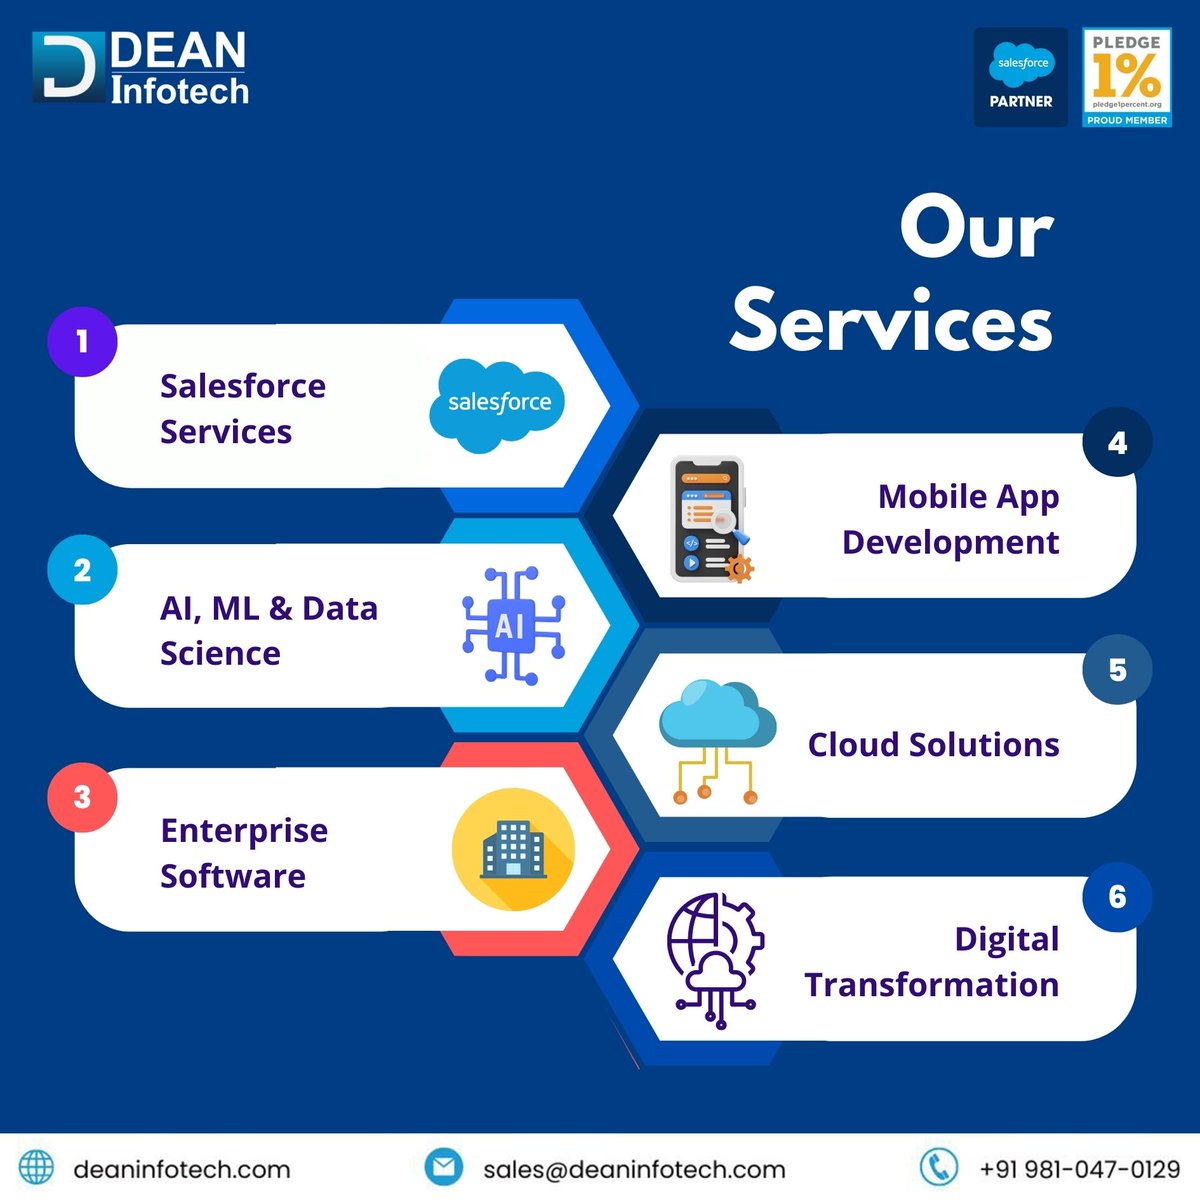 Unleash the Power of Your Business with Our Comprehensive Solutions! 💼✨
#DigitalTransformation #EnterpriseSoftware #AIandML #SalesforceServices #CloudSolutions #MobileAppDevelopment #DataScience #unitedstatesofamerica #usitrequirements #ukbusiness #ukbusinessowners #itcompanies